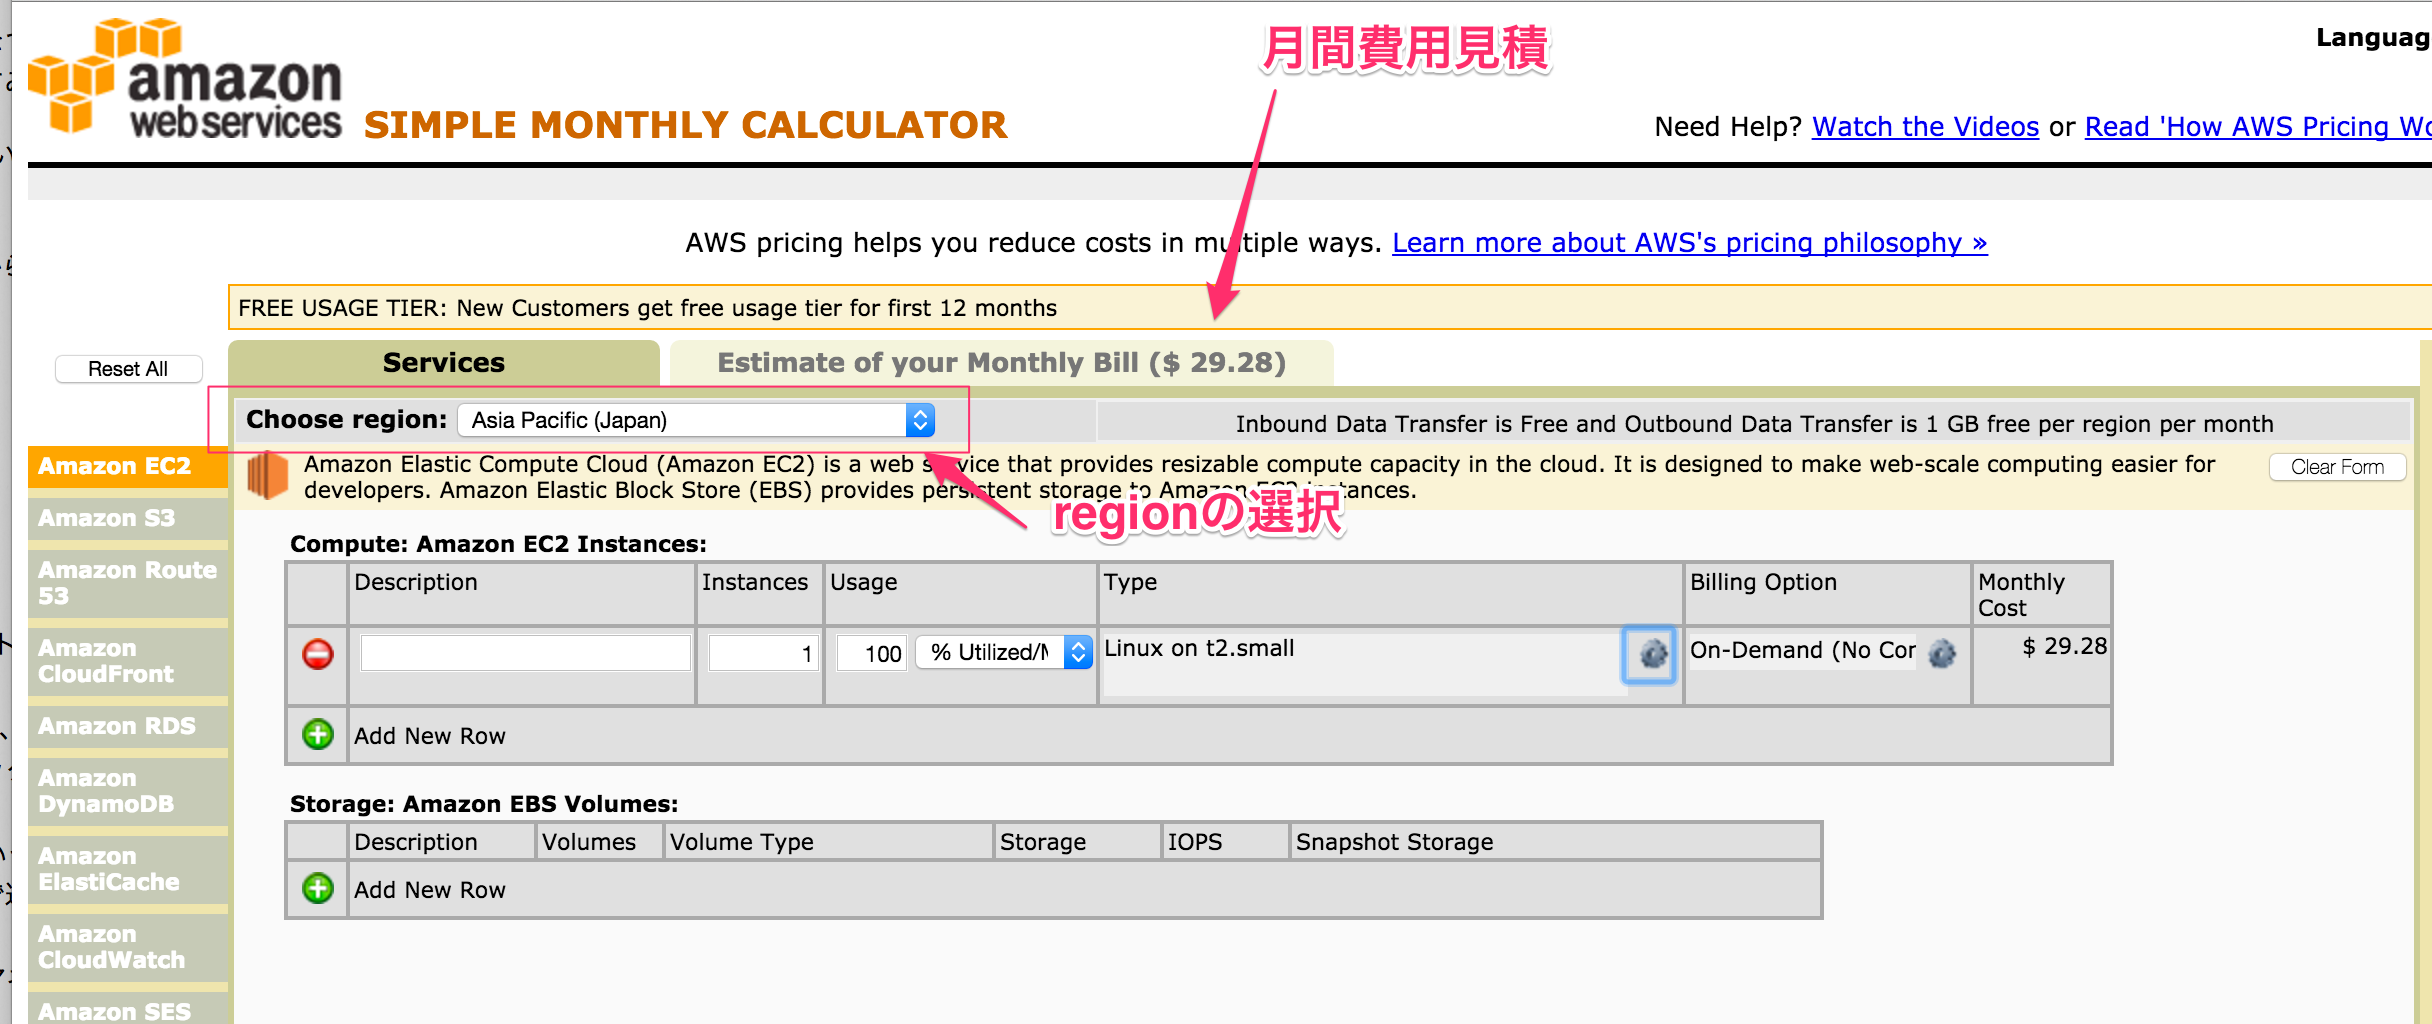 Amazon_Web_Services_Simple_Monthly_Calculator.png